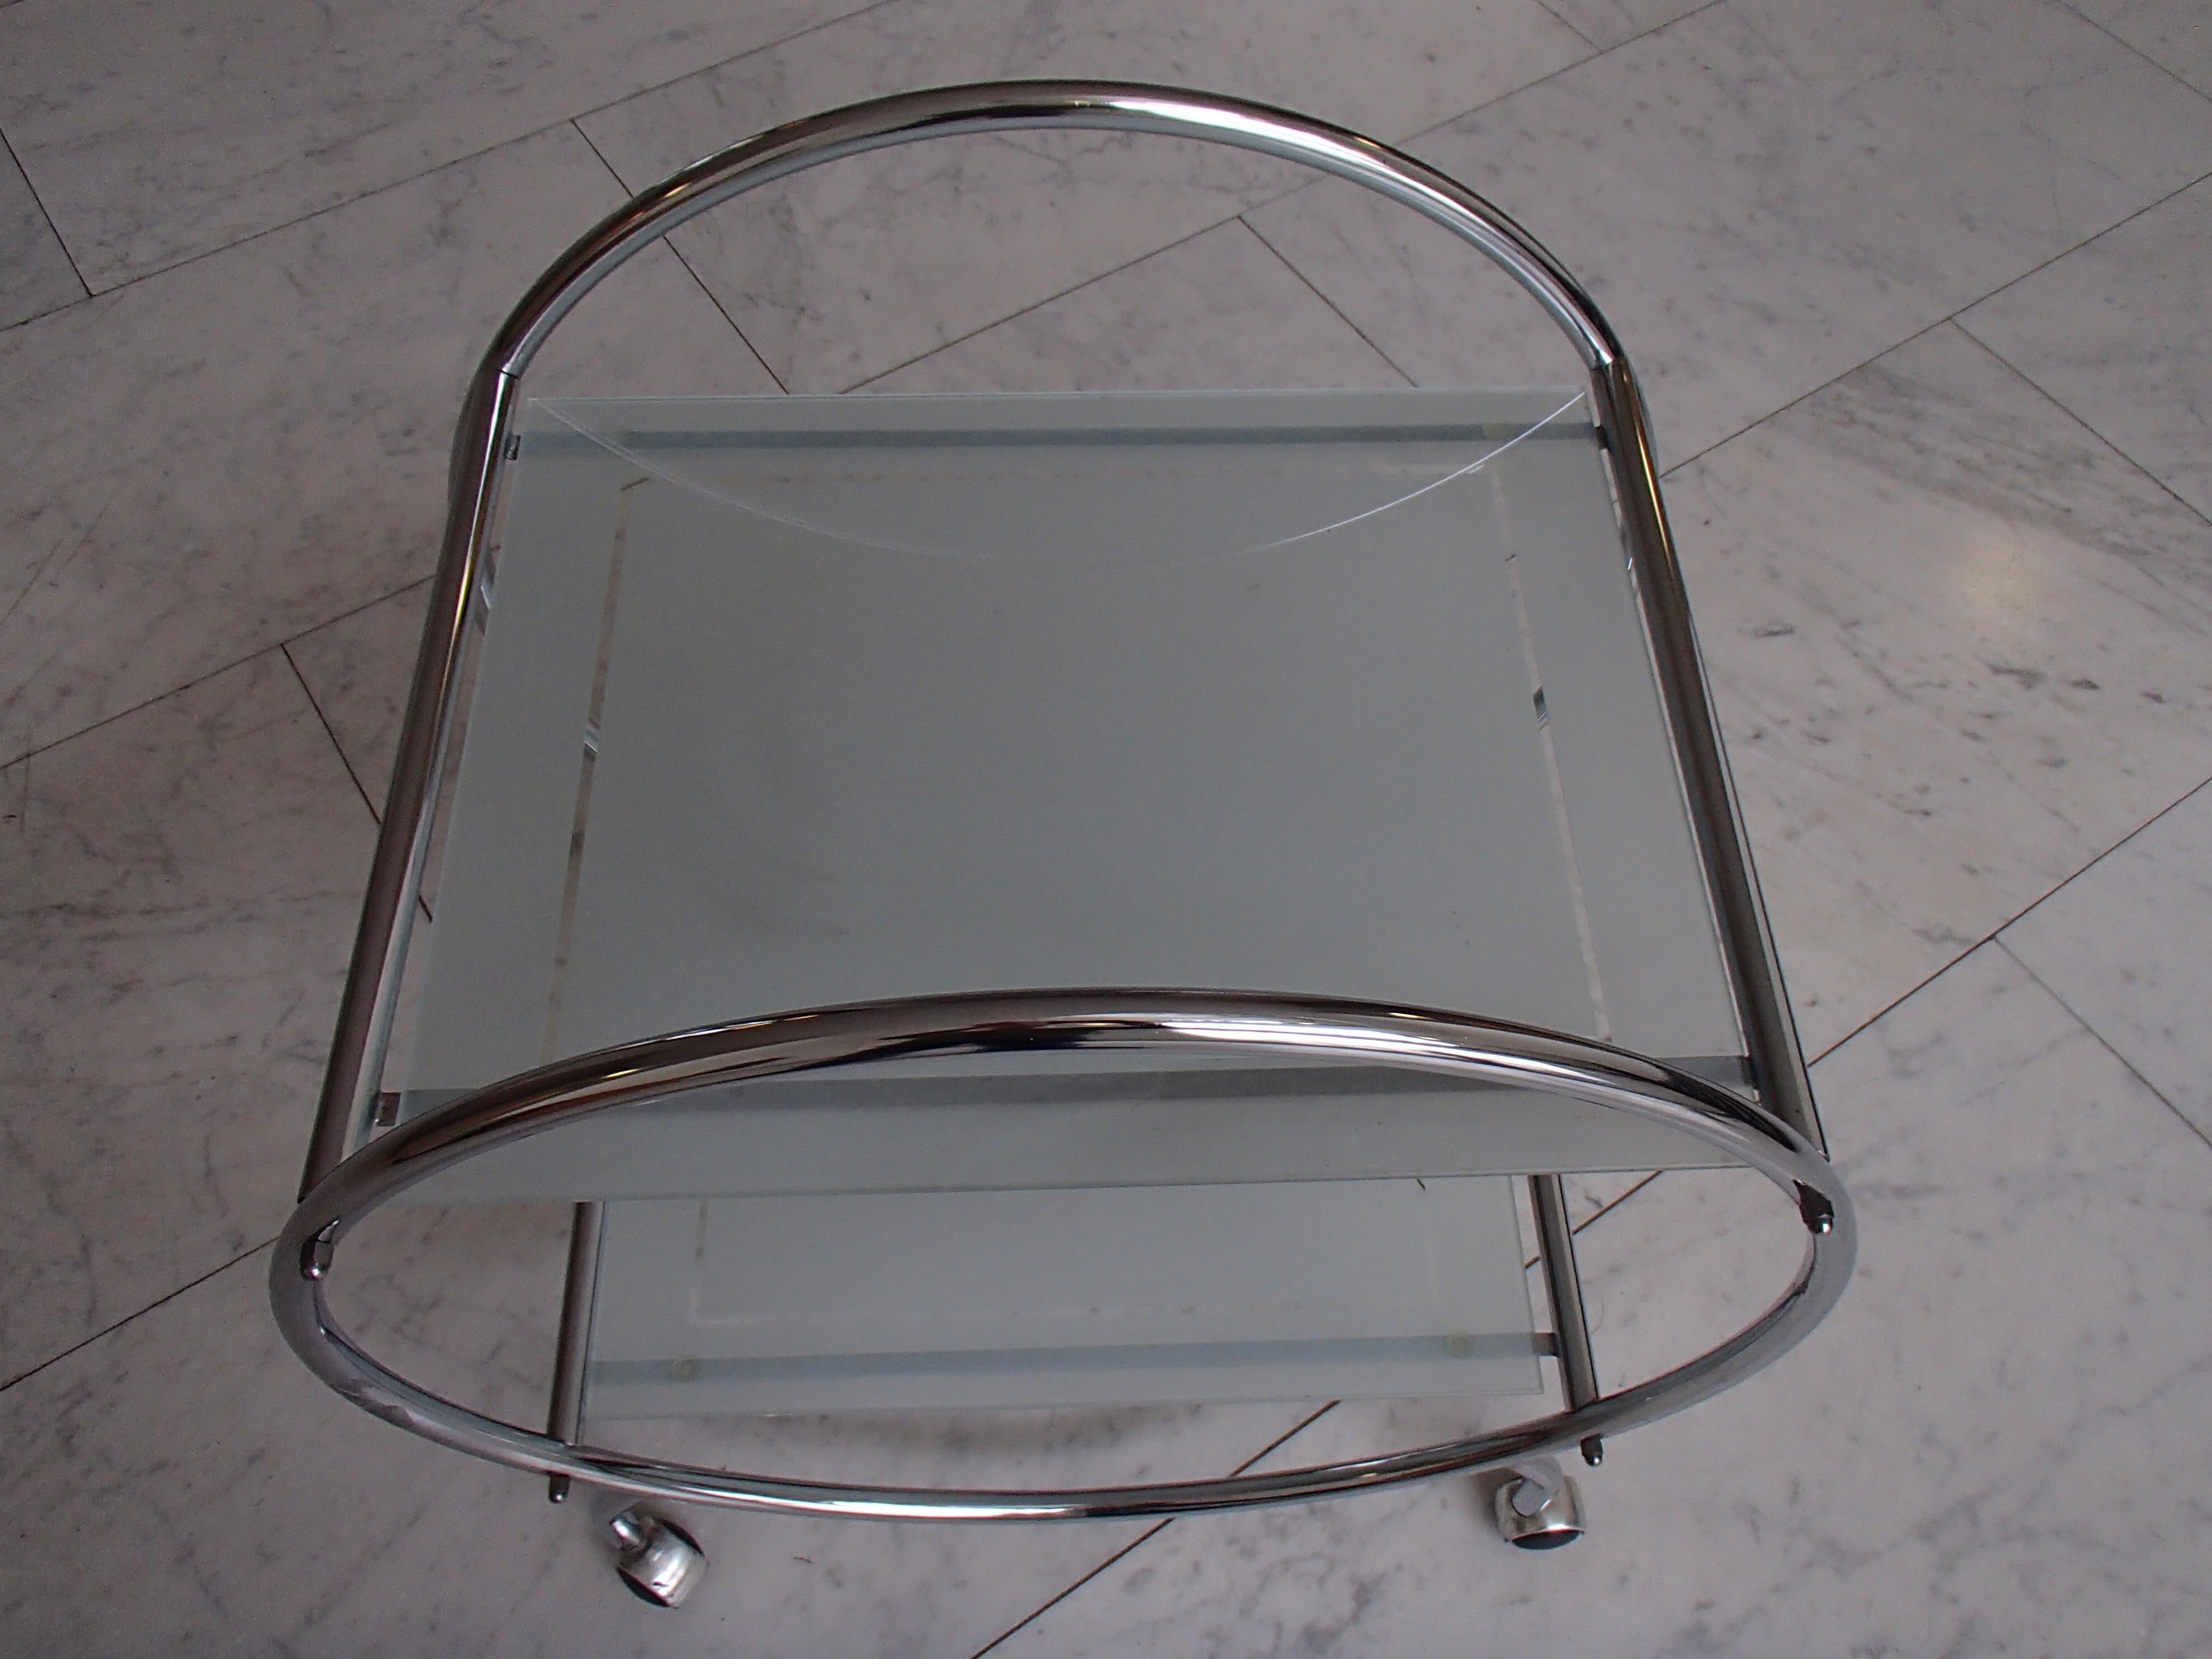 Round Chrome Art Deco Bar Cart Trolley with 2 Glass Shelves For Sale 1